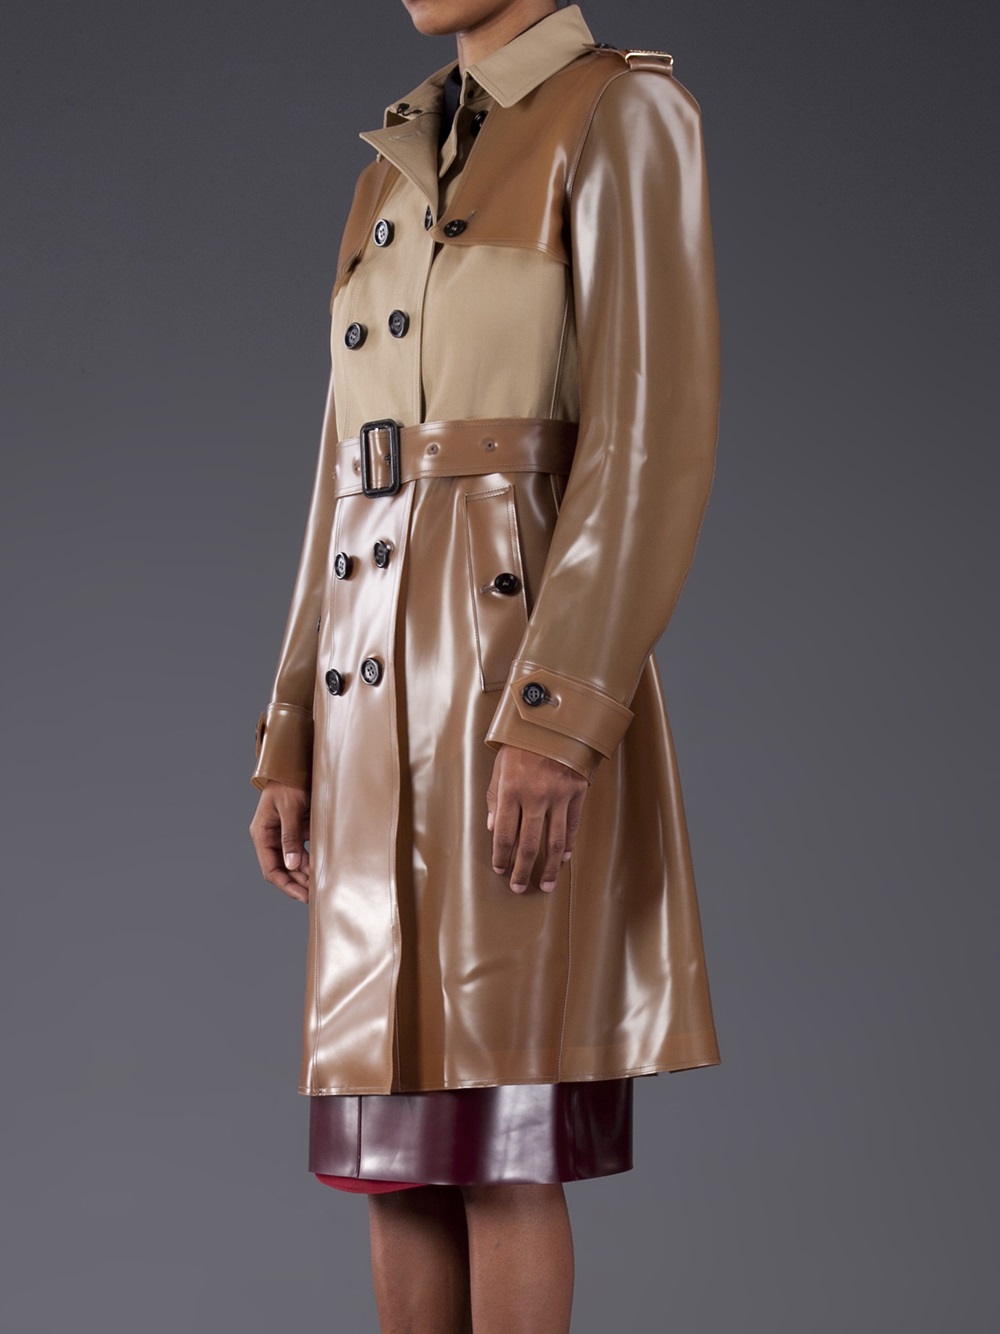 Lyst - Burberry Prorsum Honey Rubber Trench Coat in Brown